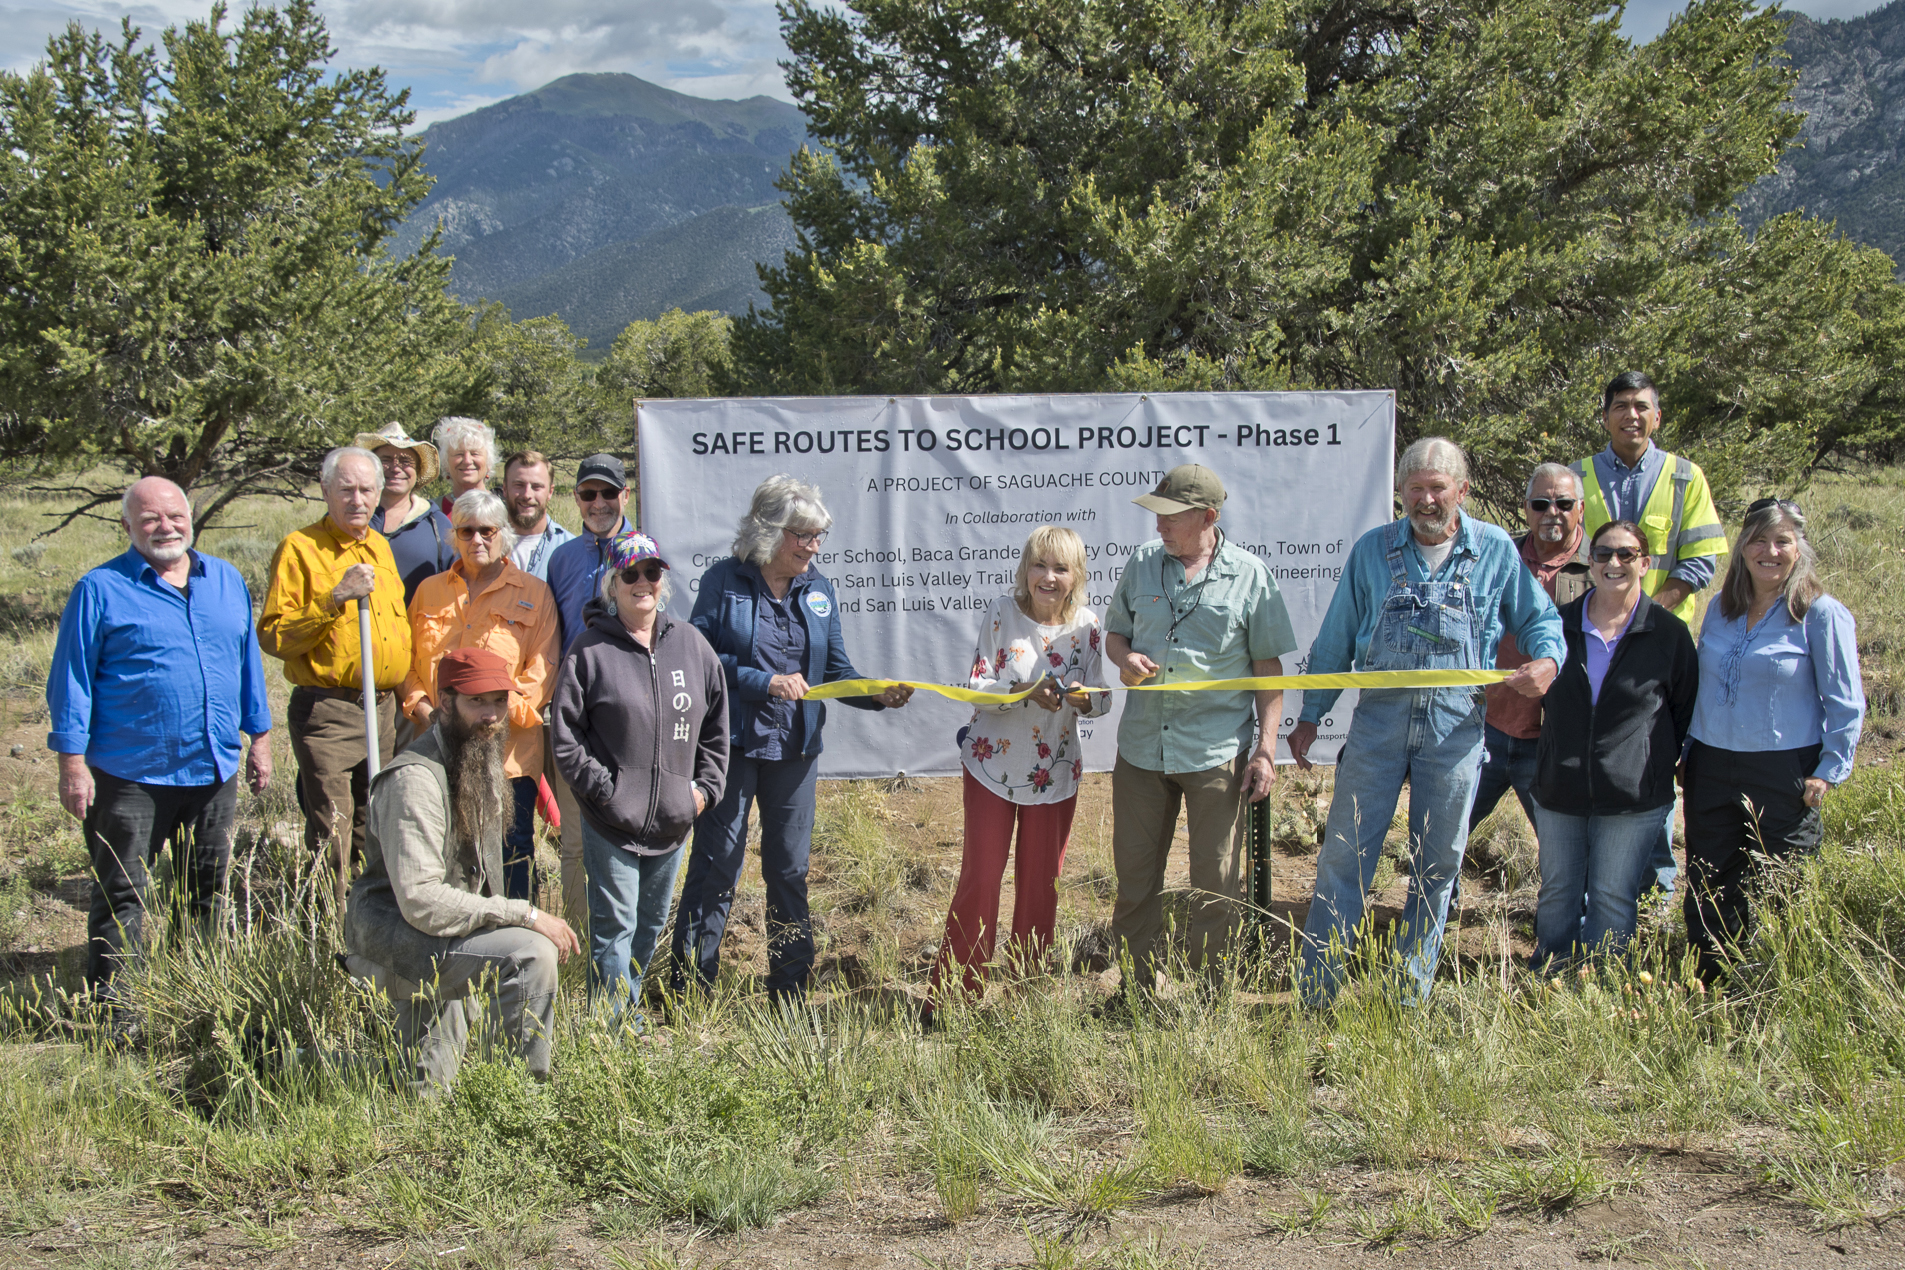 A group of individuals stands outdoors holding a banner that reads “SAFE ROUTES TO SCHOOL PROJECT – Phase 1” with additional text below that is partially obscured. The group appears to be participating in a ceremonial ribbon-cutting event, The setting includes trees and mountains in the background, suggesting a rural or natural location.